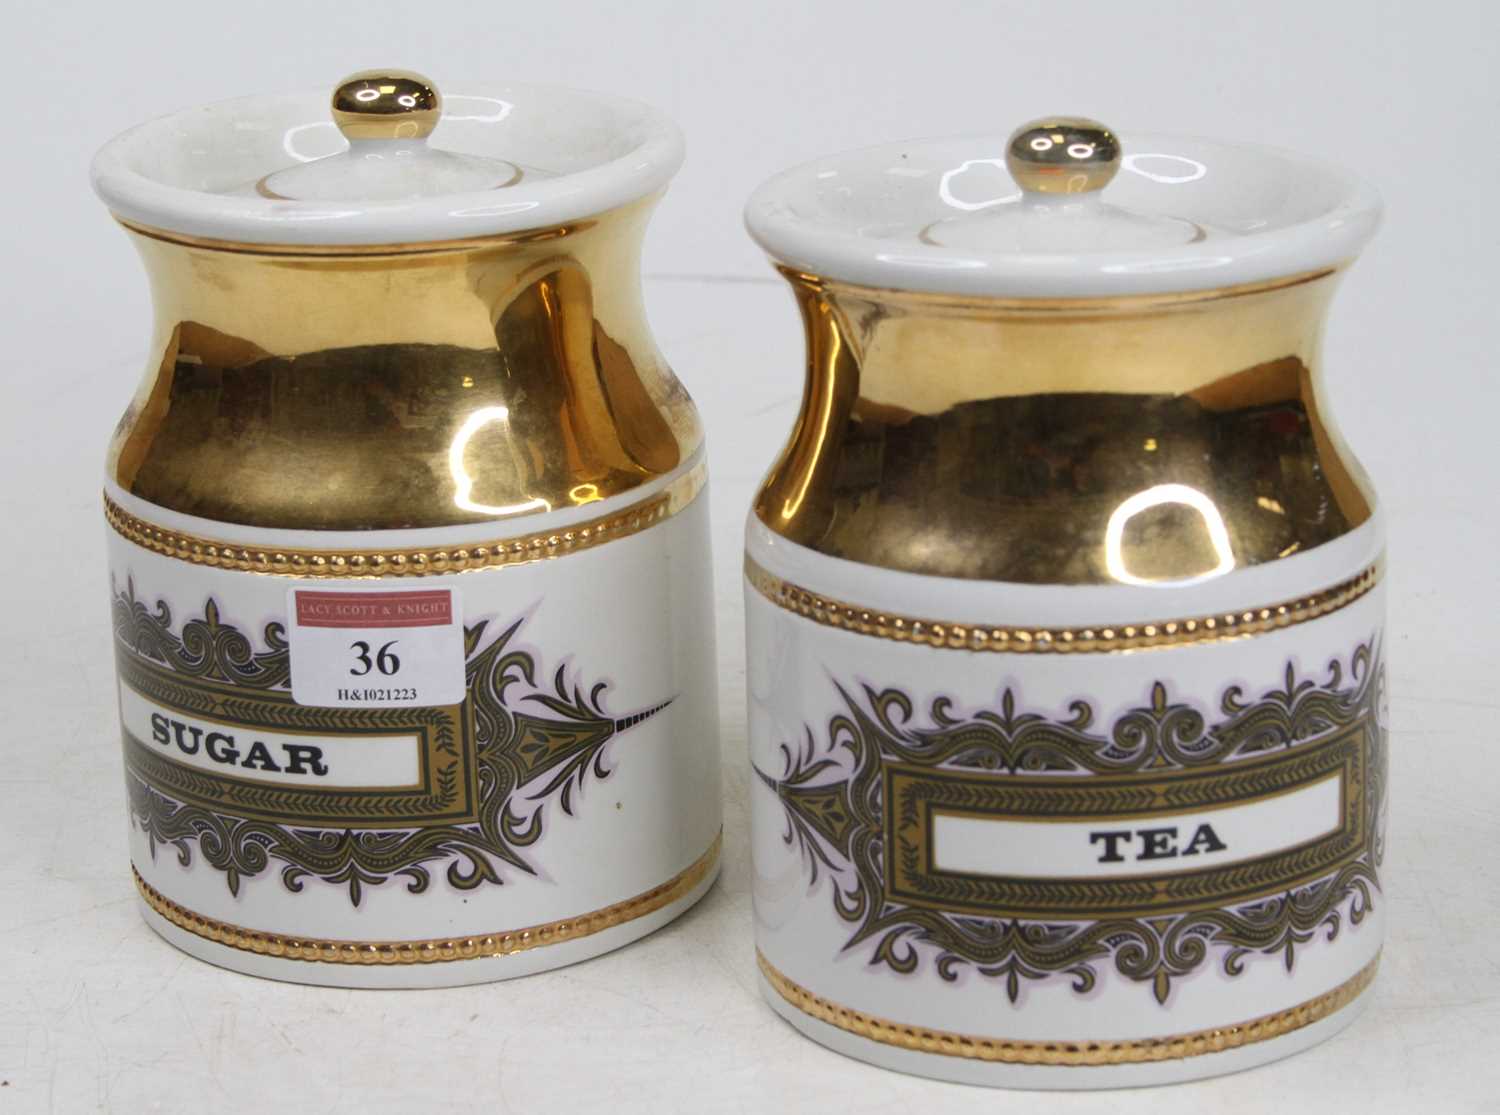 A pair of Robert Stewart pottery canisters, each inscribed Tea and Sugar, height 16cm